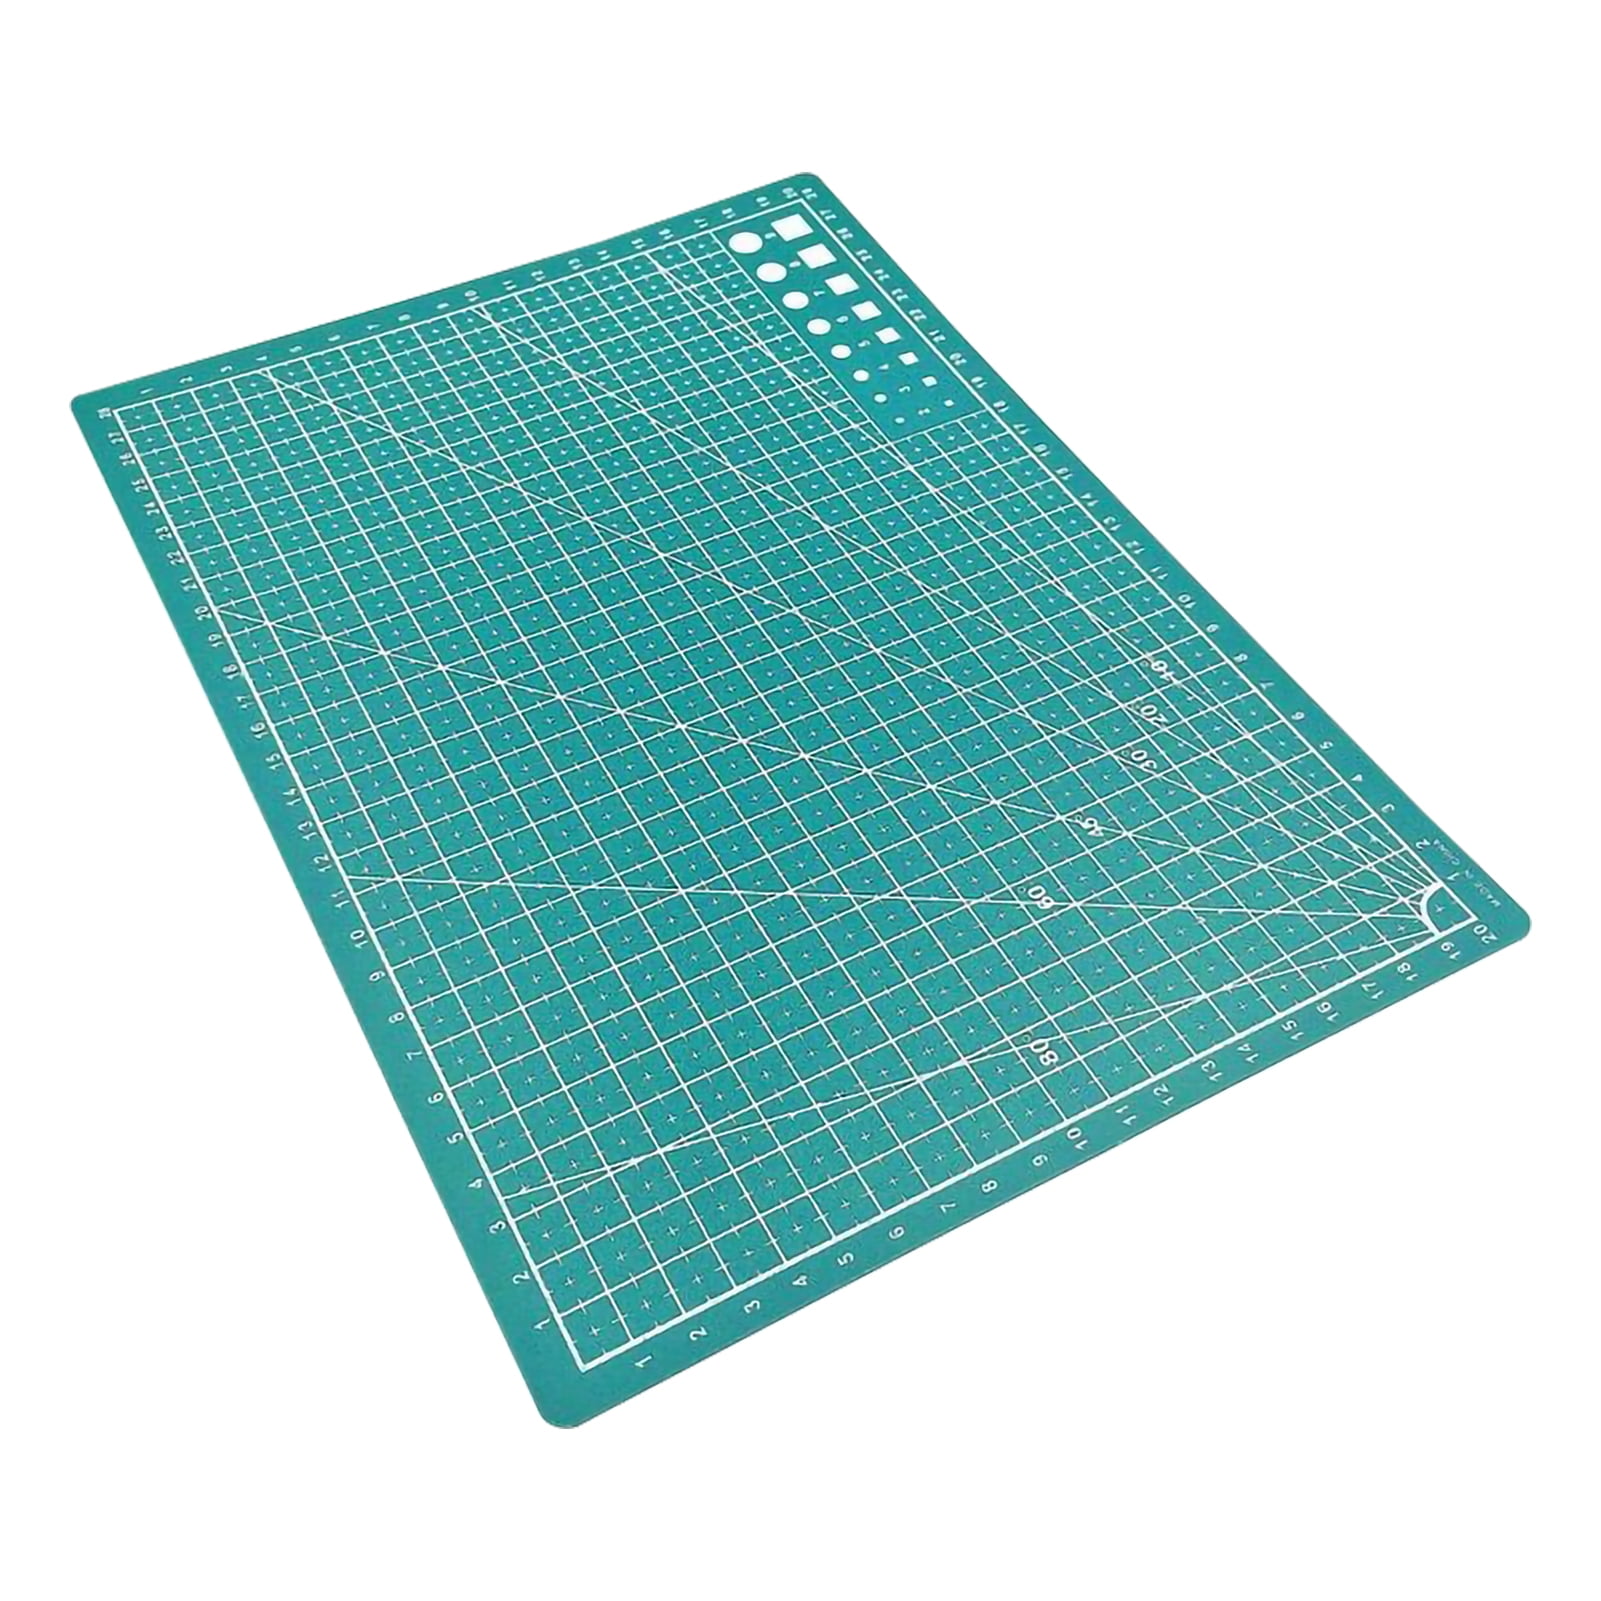 Carevas A3 Cutting Mat Single-Sided Cutting Board Cut Pad DIY Tool with Clear Grid Lines Angles for Scrapbooking Art and Craft Projects, Green